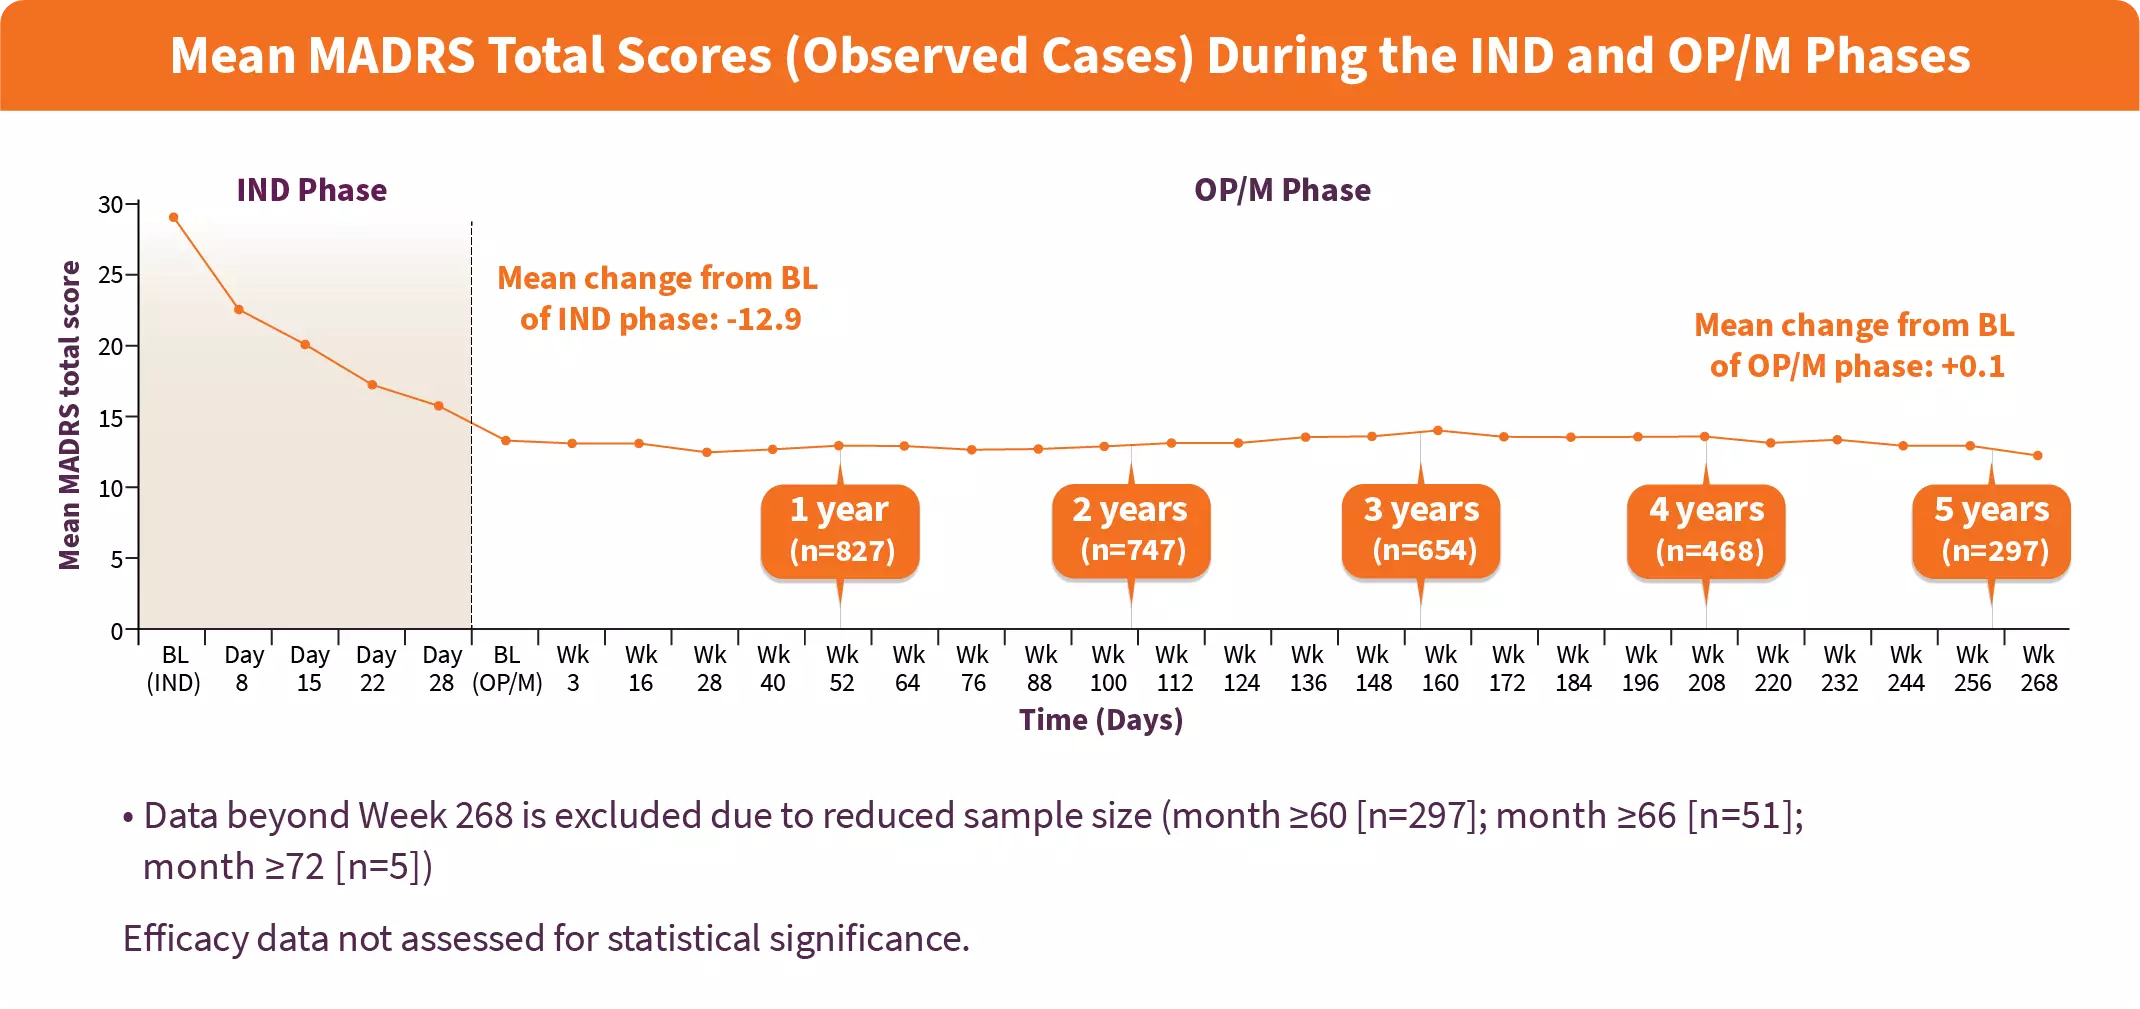 Mean MADRS Total Scores (Observed Cases) during the induction and optimization/maintenance phases over 5 years